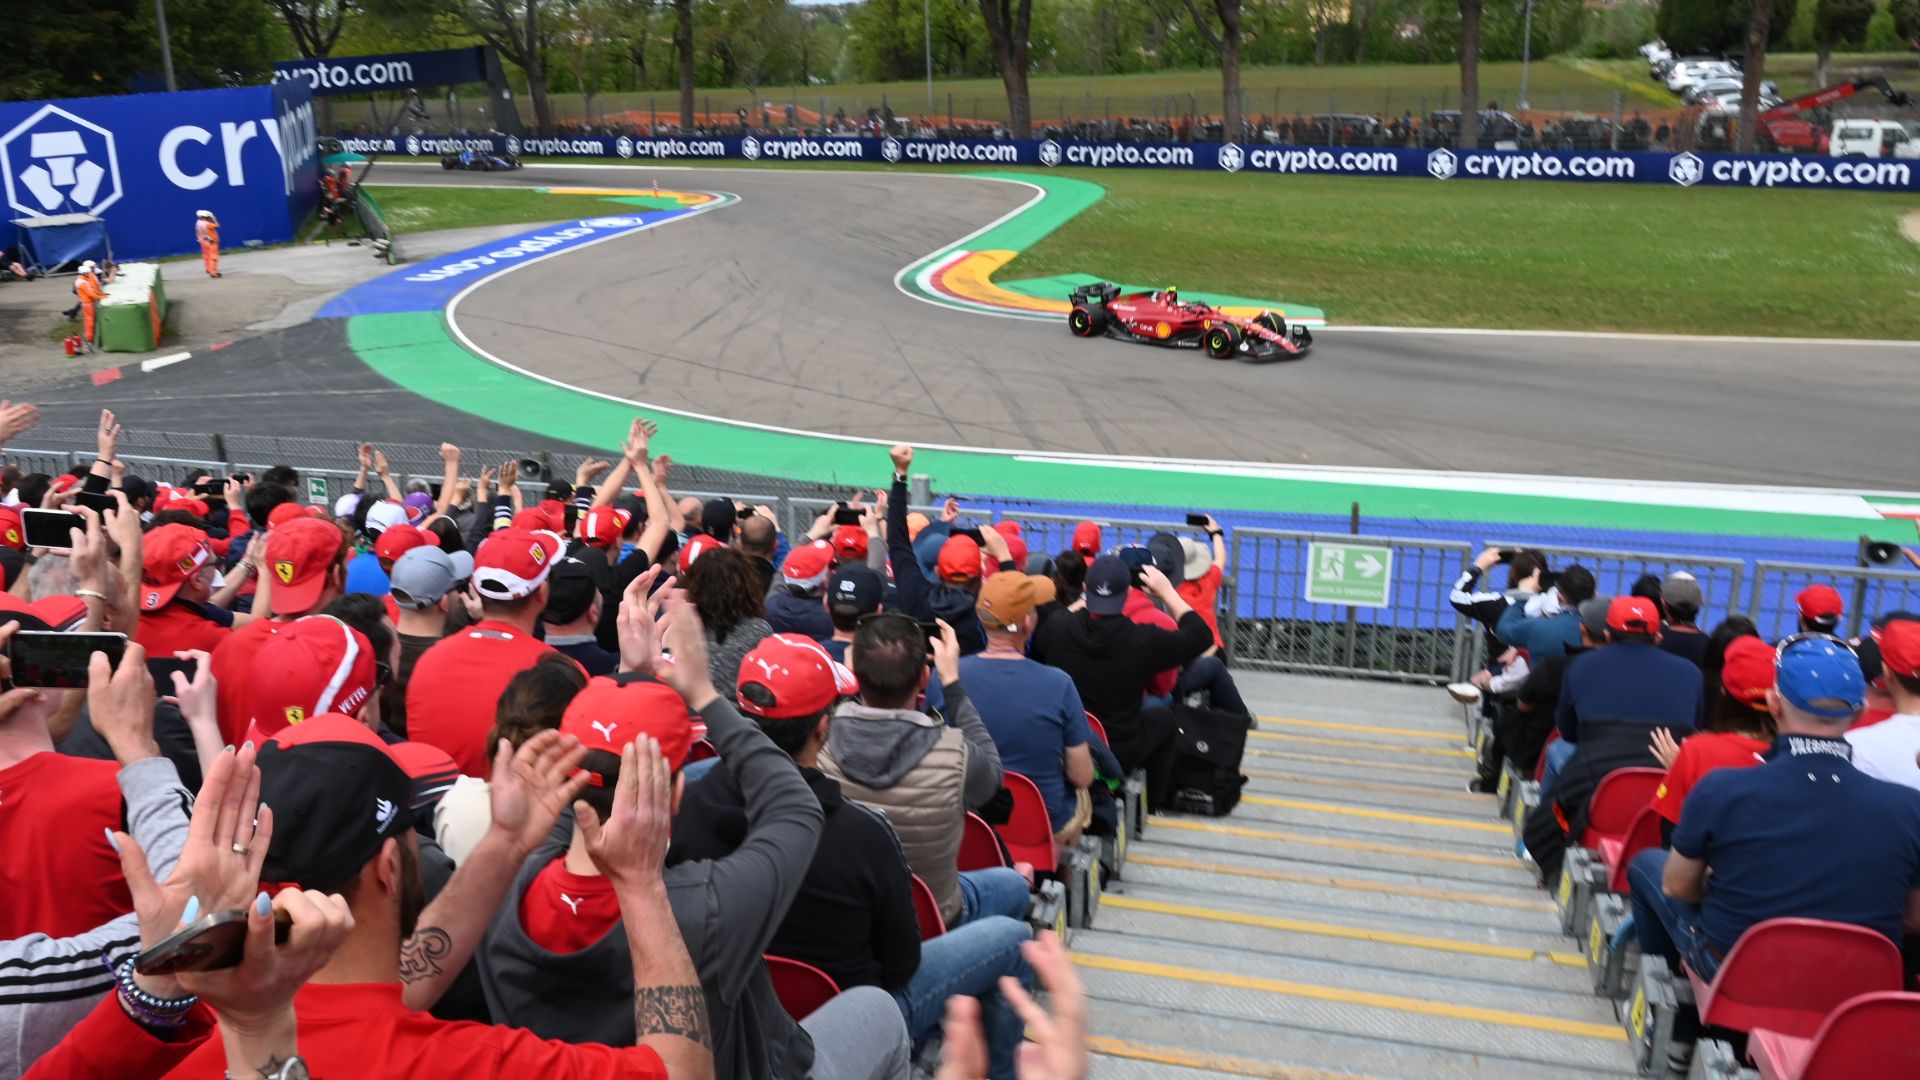 Formula 1, 2023 calendar: the date of the grand prix of Made in Italy and Emilia-Romagna has been confirmed.